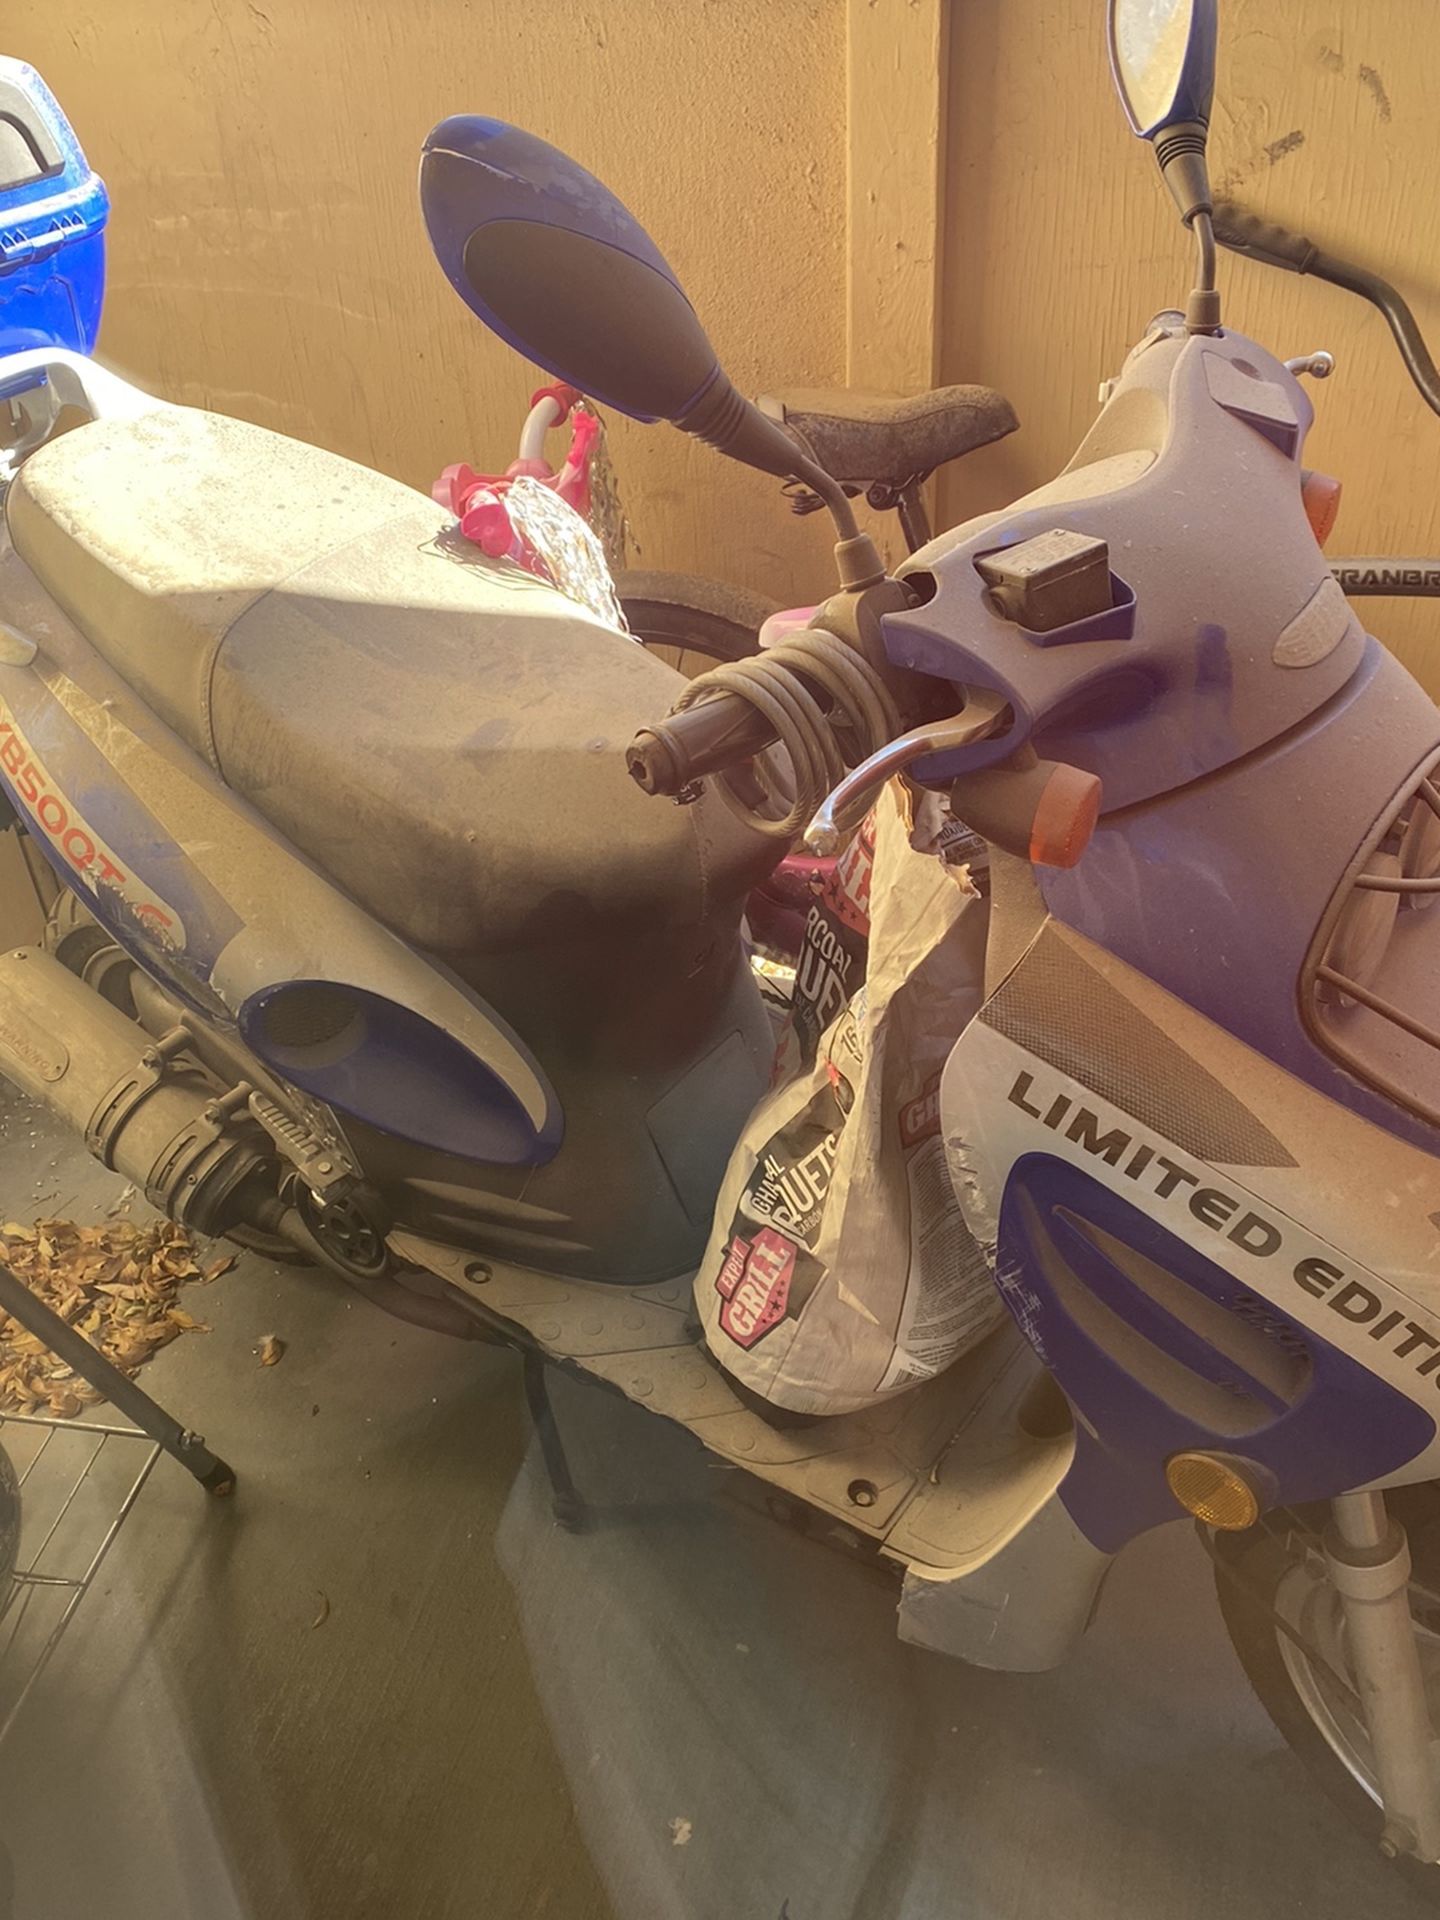 Scooter /Motorcycle For Sale $300..... No title Only Dmv Paperwork